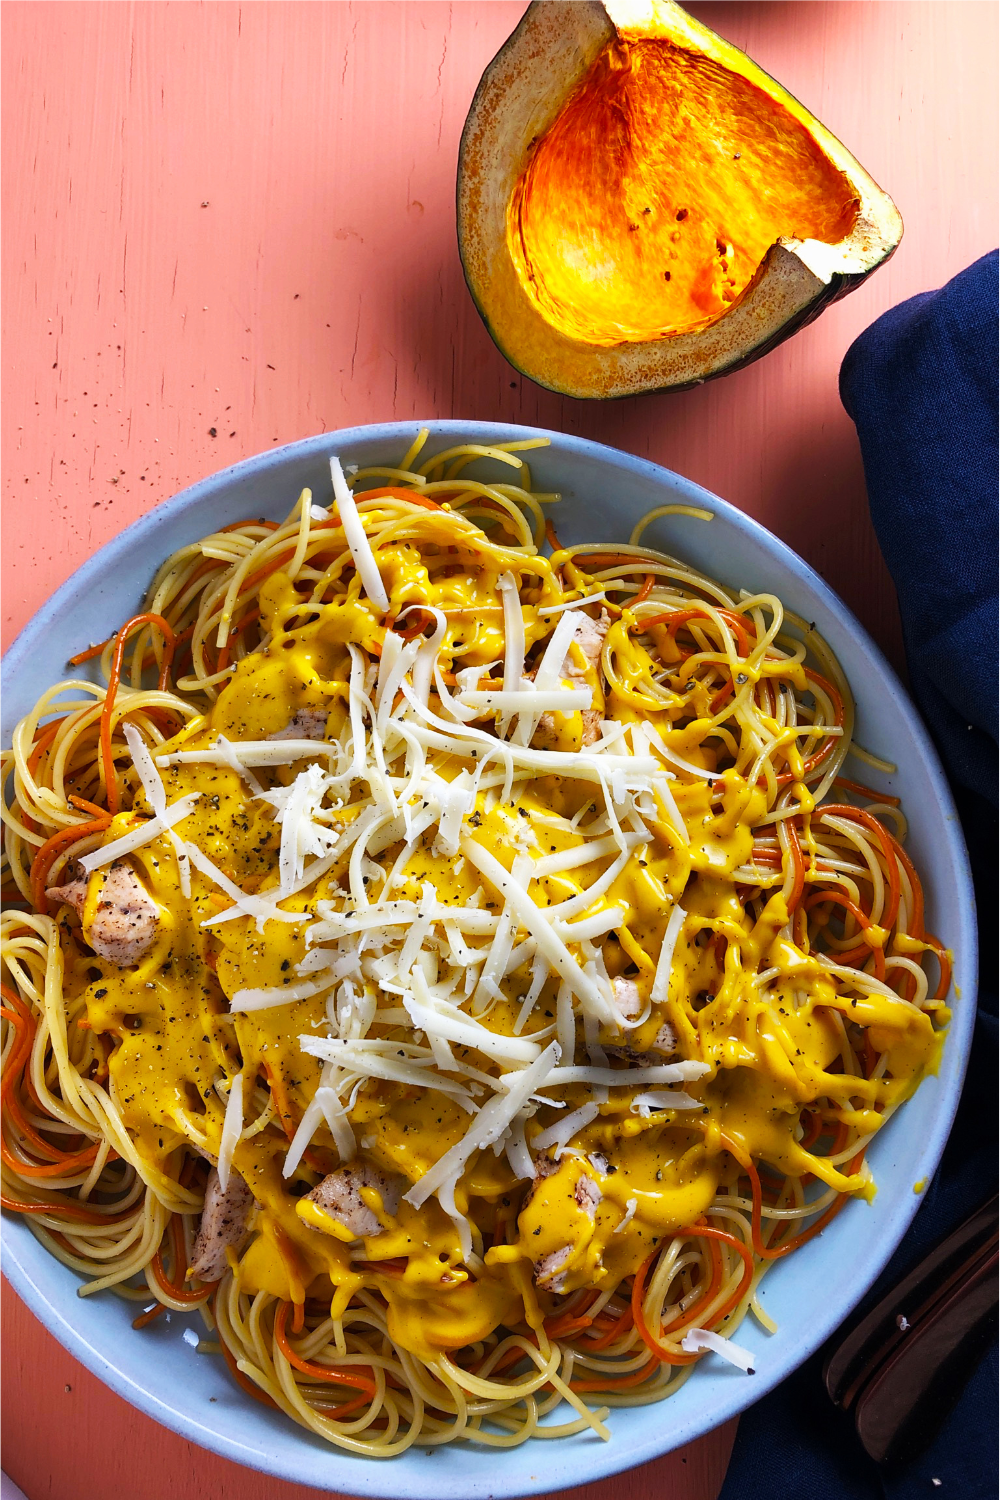 Top-down view of Kabocha Squash and Cheddar Cheese Pasta Sauce, on a blue plate against and orange background